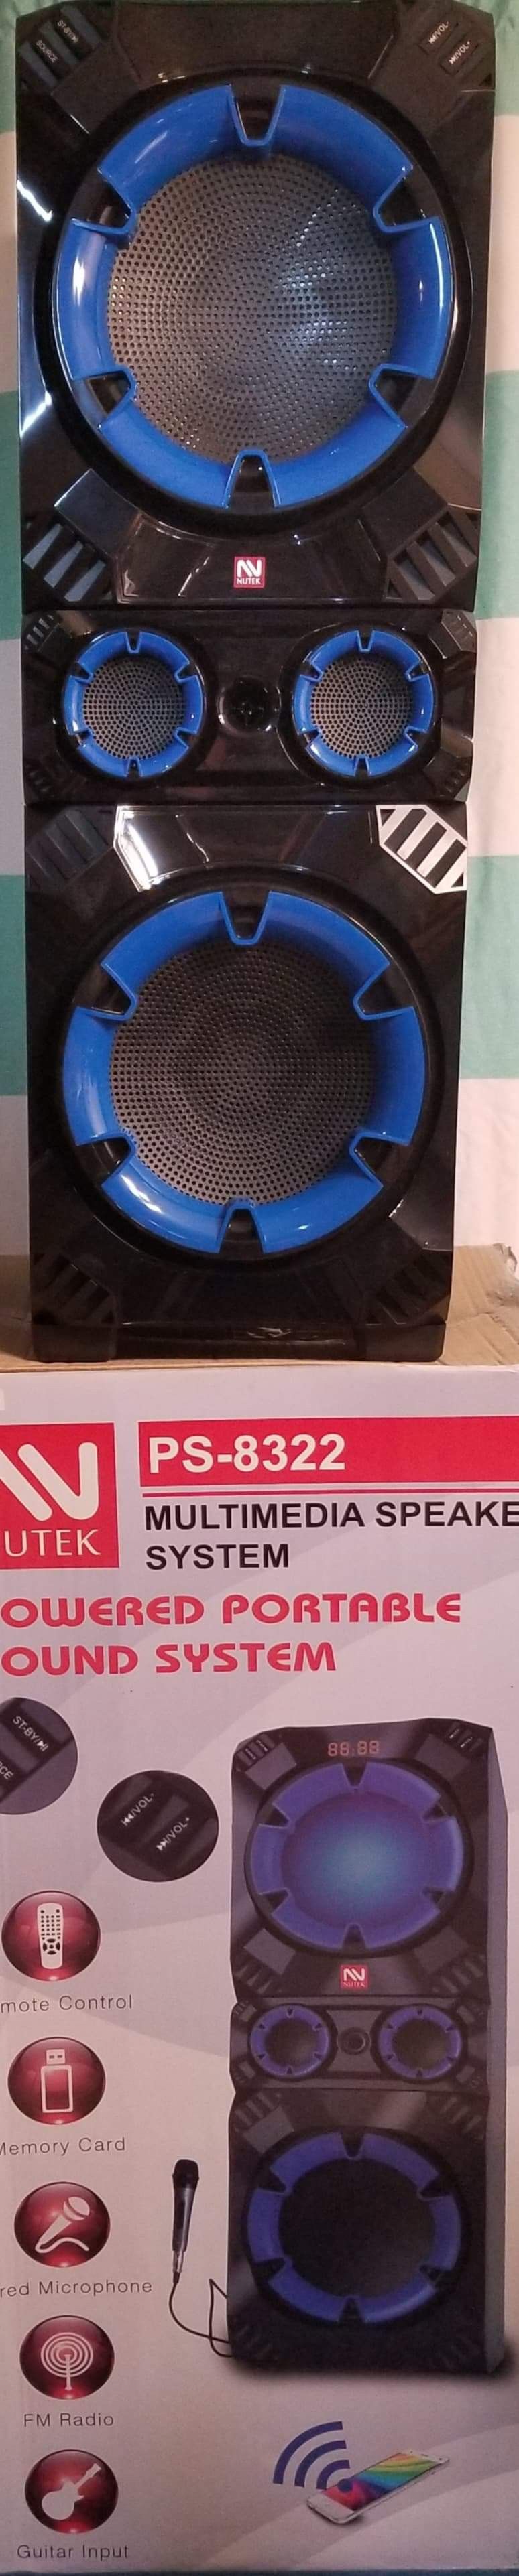 New Bluetooth speaker sd card slot usb port fm radio microphone included for karaoke many more available ( bosina )